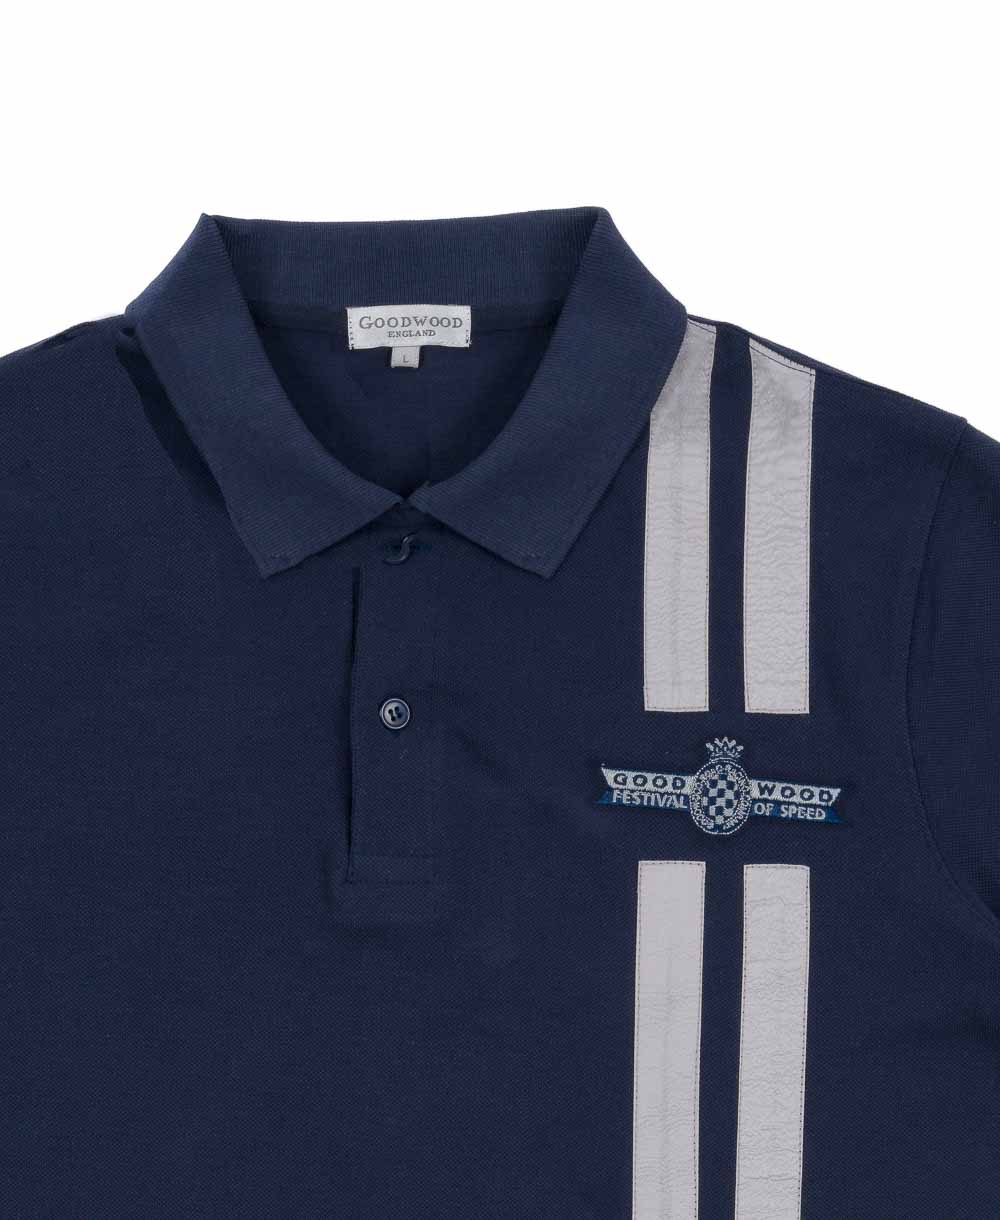 Goodwood Festival of Speed Cotton Navy Polo Shirt